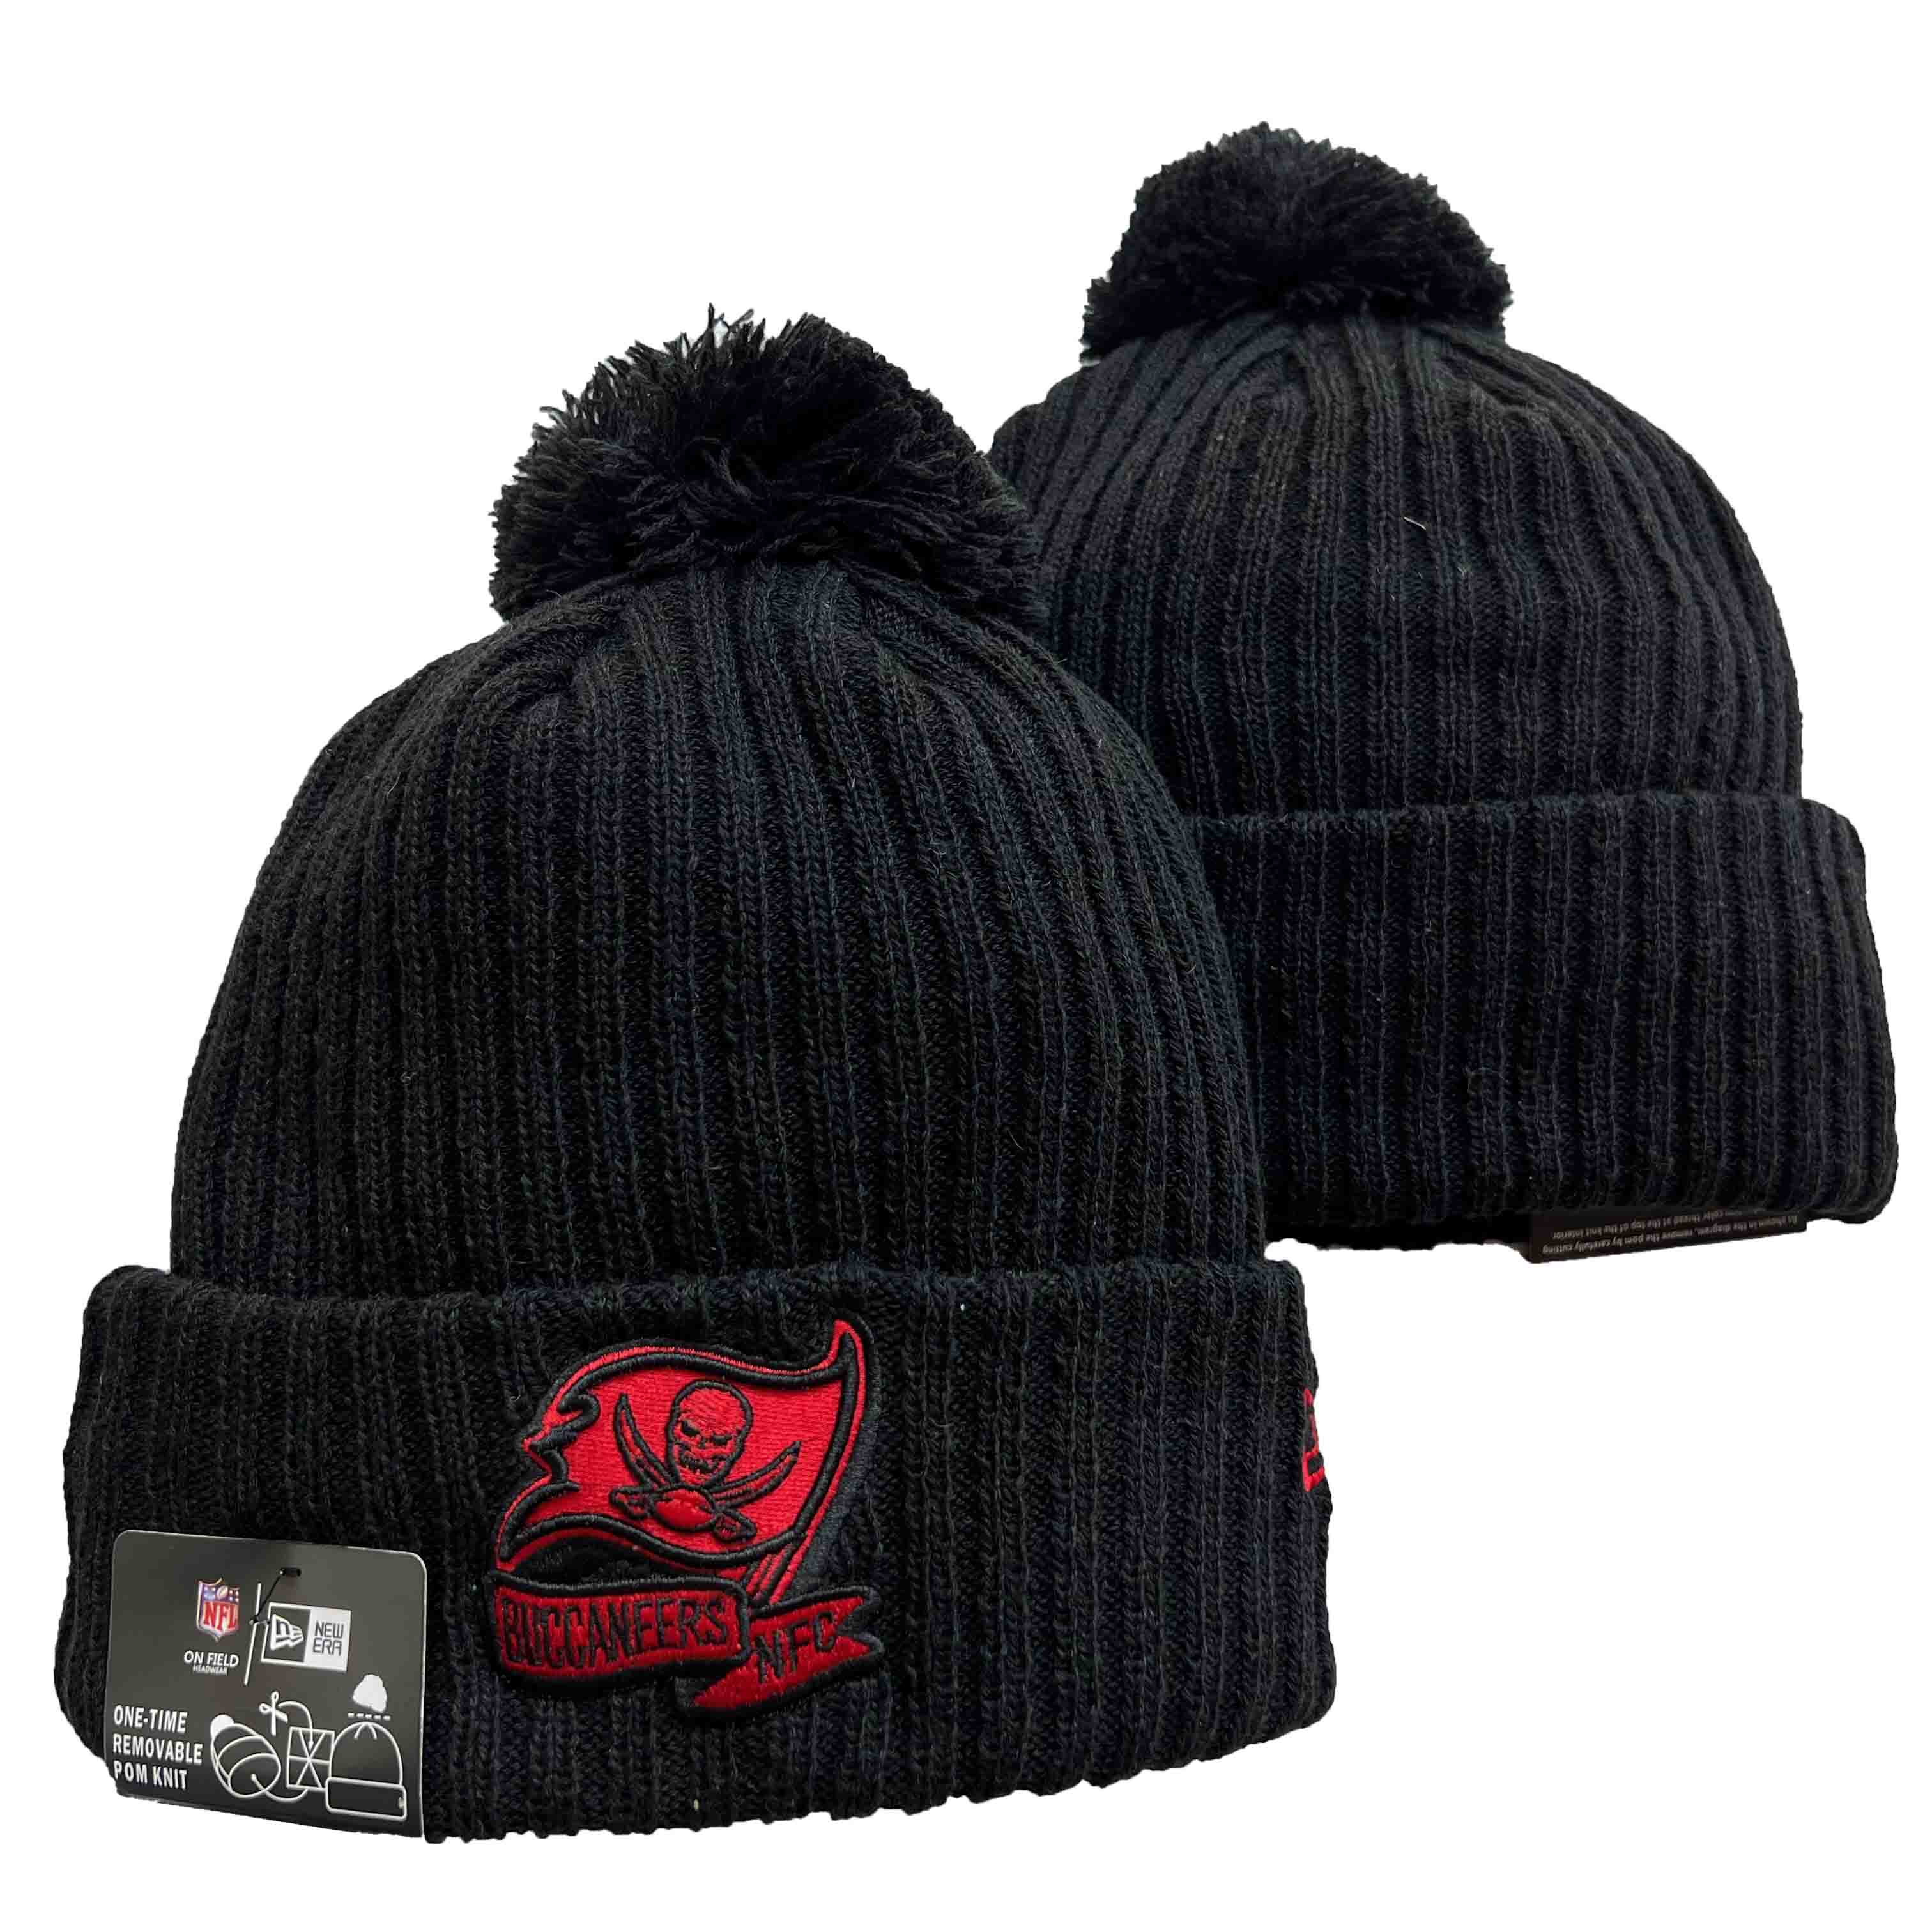 Tampa Bay Buccaneers 2021 Knit Hats 0210